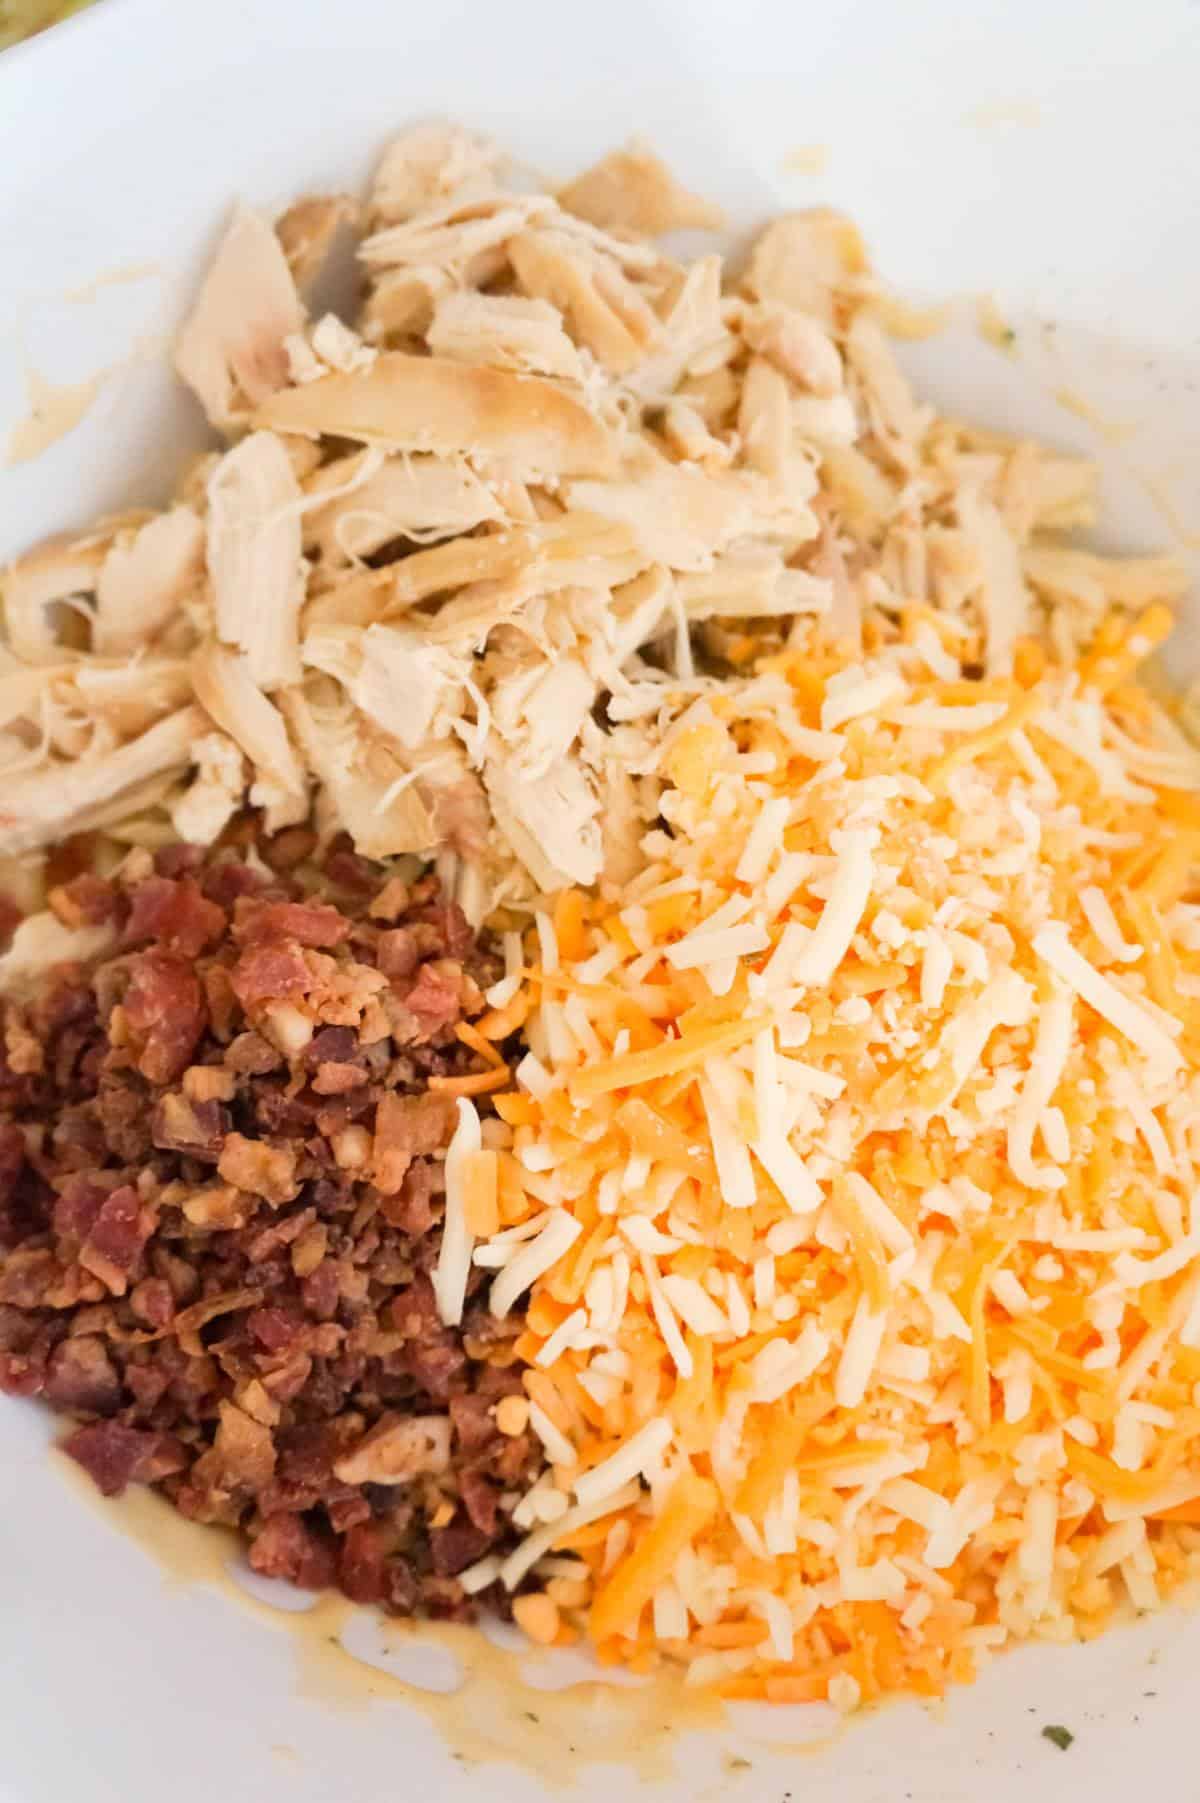 shredded chicken, crumbled bacon and shredded cheddar cheese on top of penne pasta in a mixing bowl